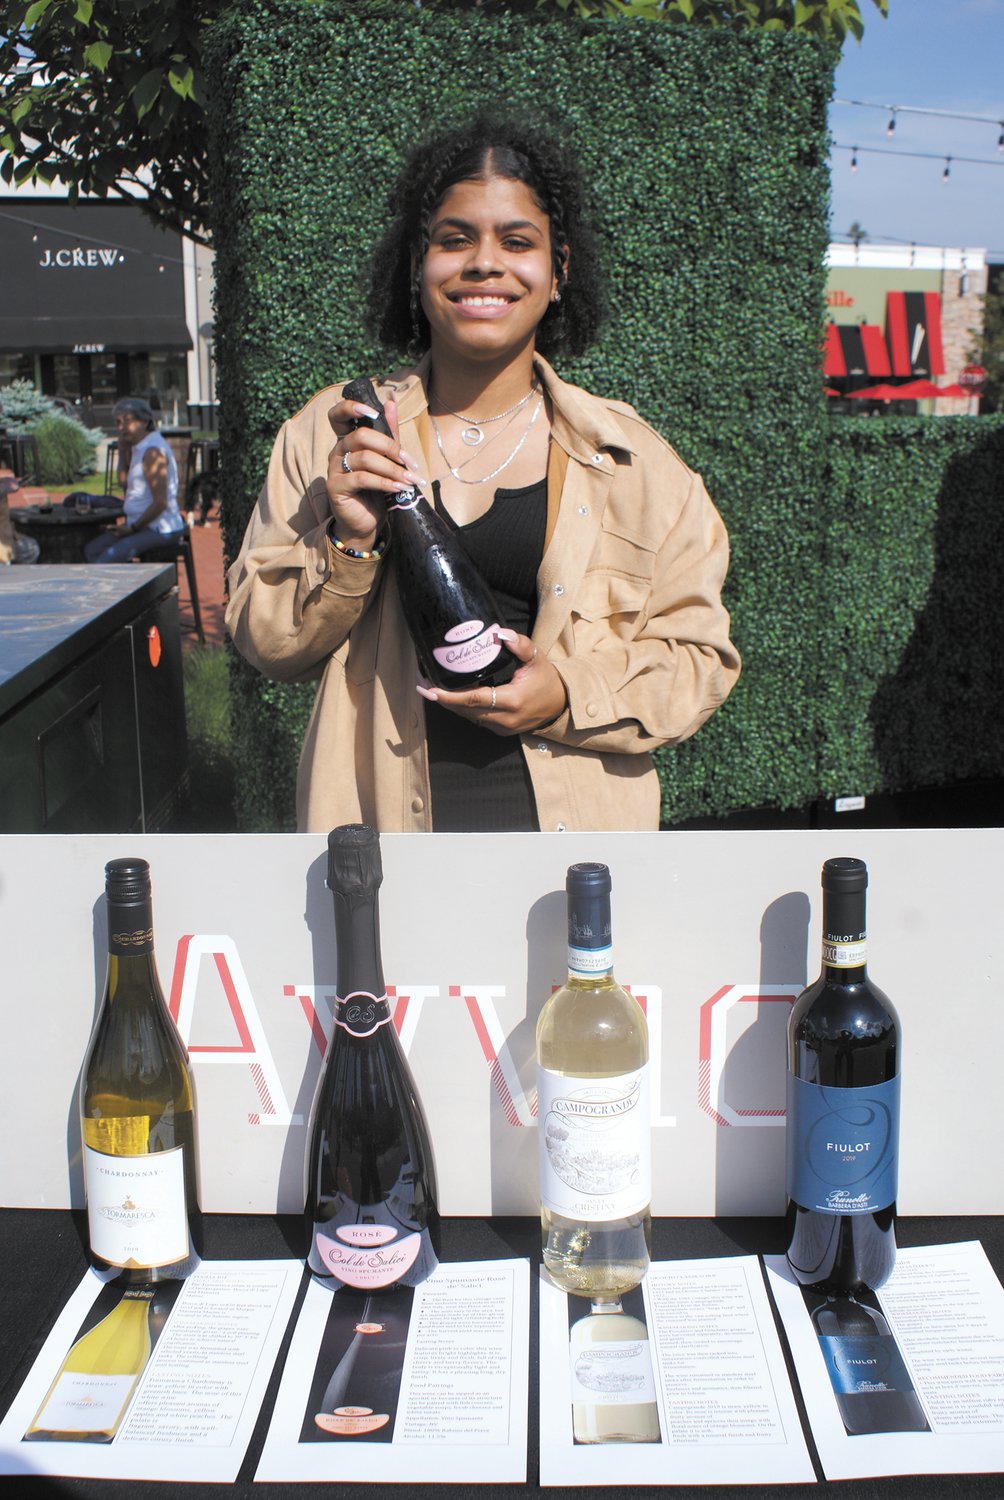 GOOD SELECTION: Avvio’s server Yomi Mendez poses with a selection of wines from one of this season’s Sip and Shop events: Tormaresca Vino Spumante Rose, Campogrande Orvieto and Barbara D’Asti Firlot. (Photo by Steve Popiel)